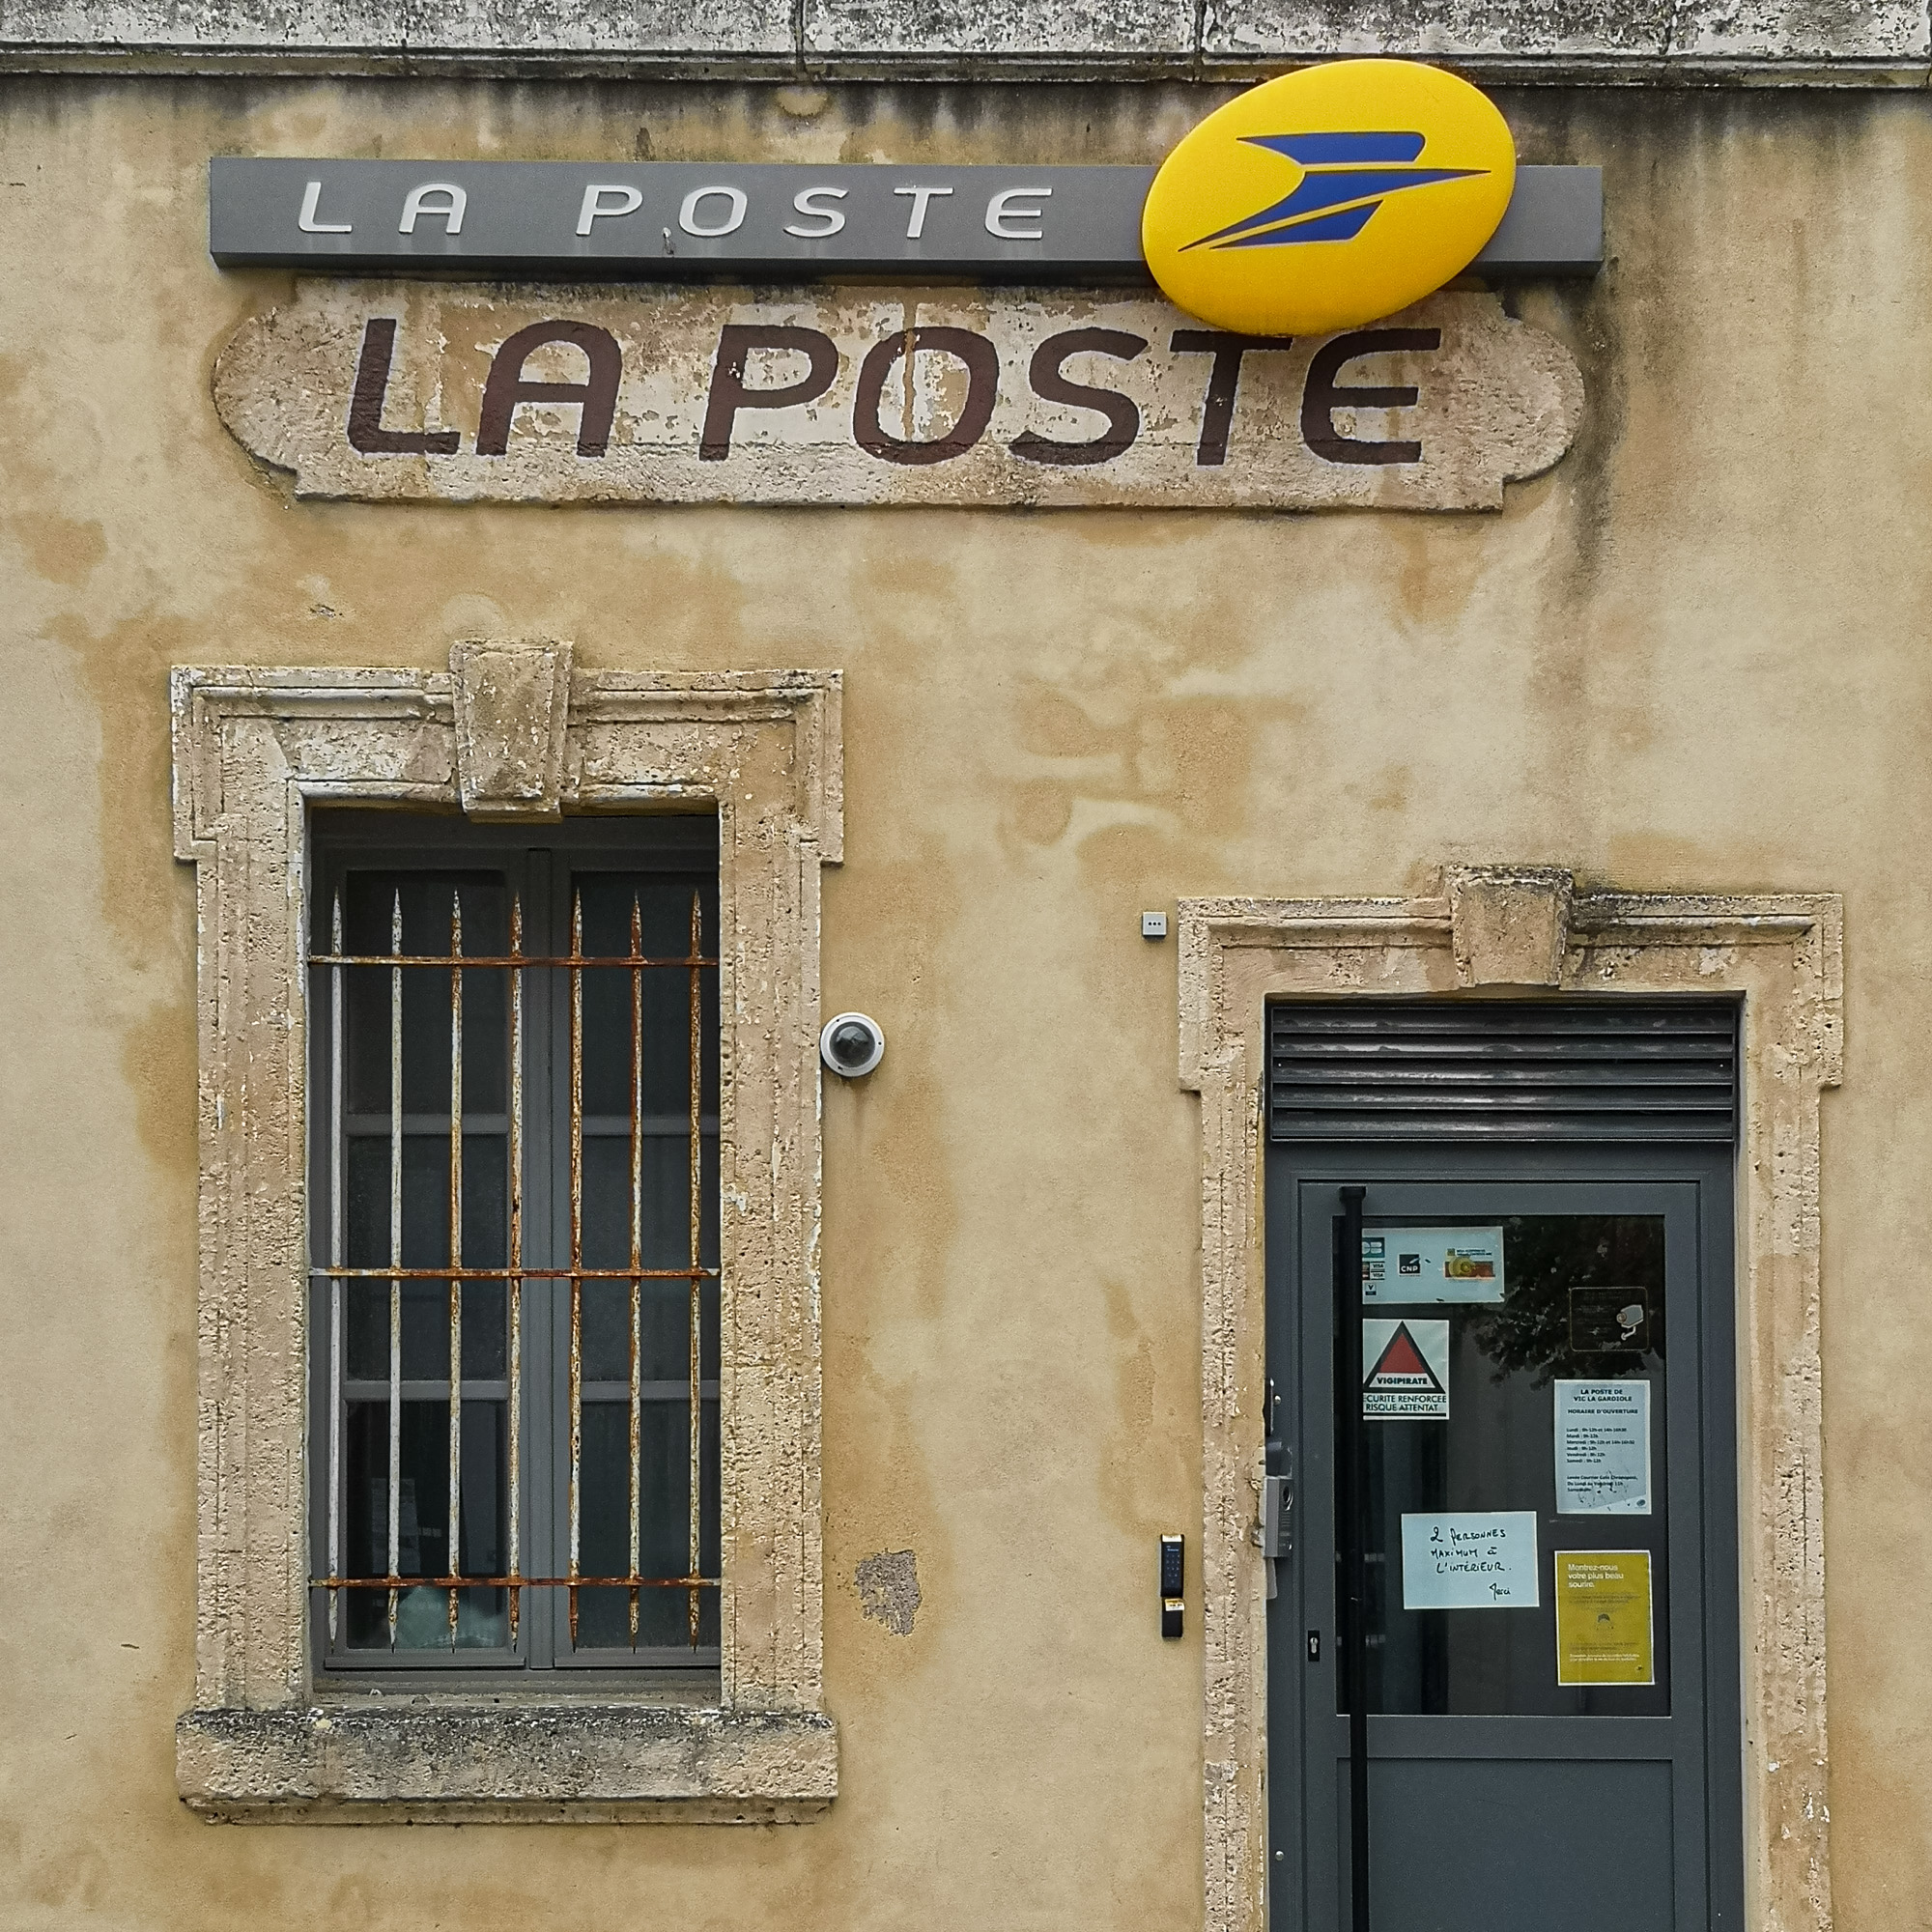 La Poste, from old to new.